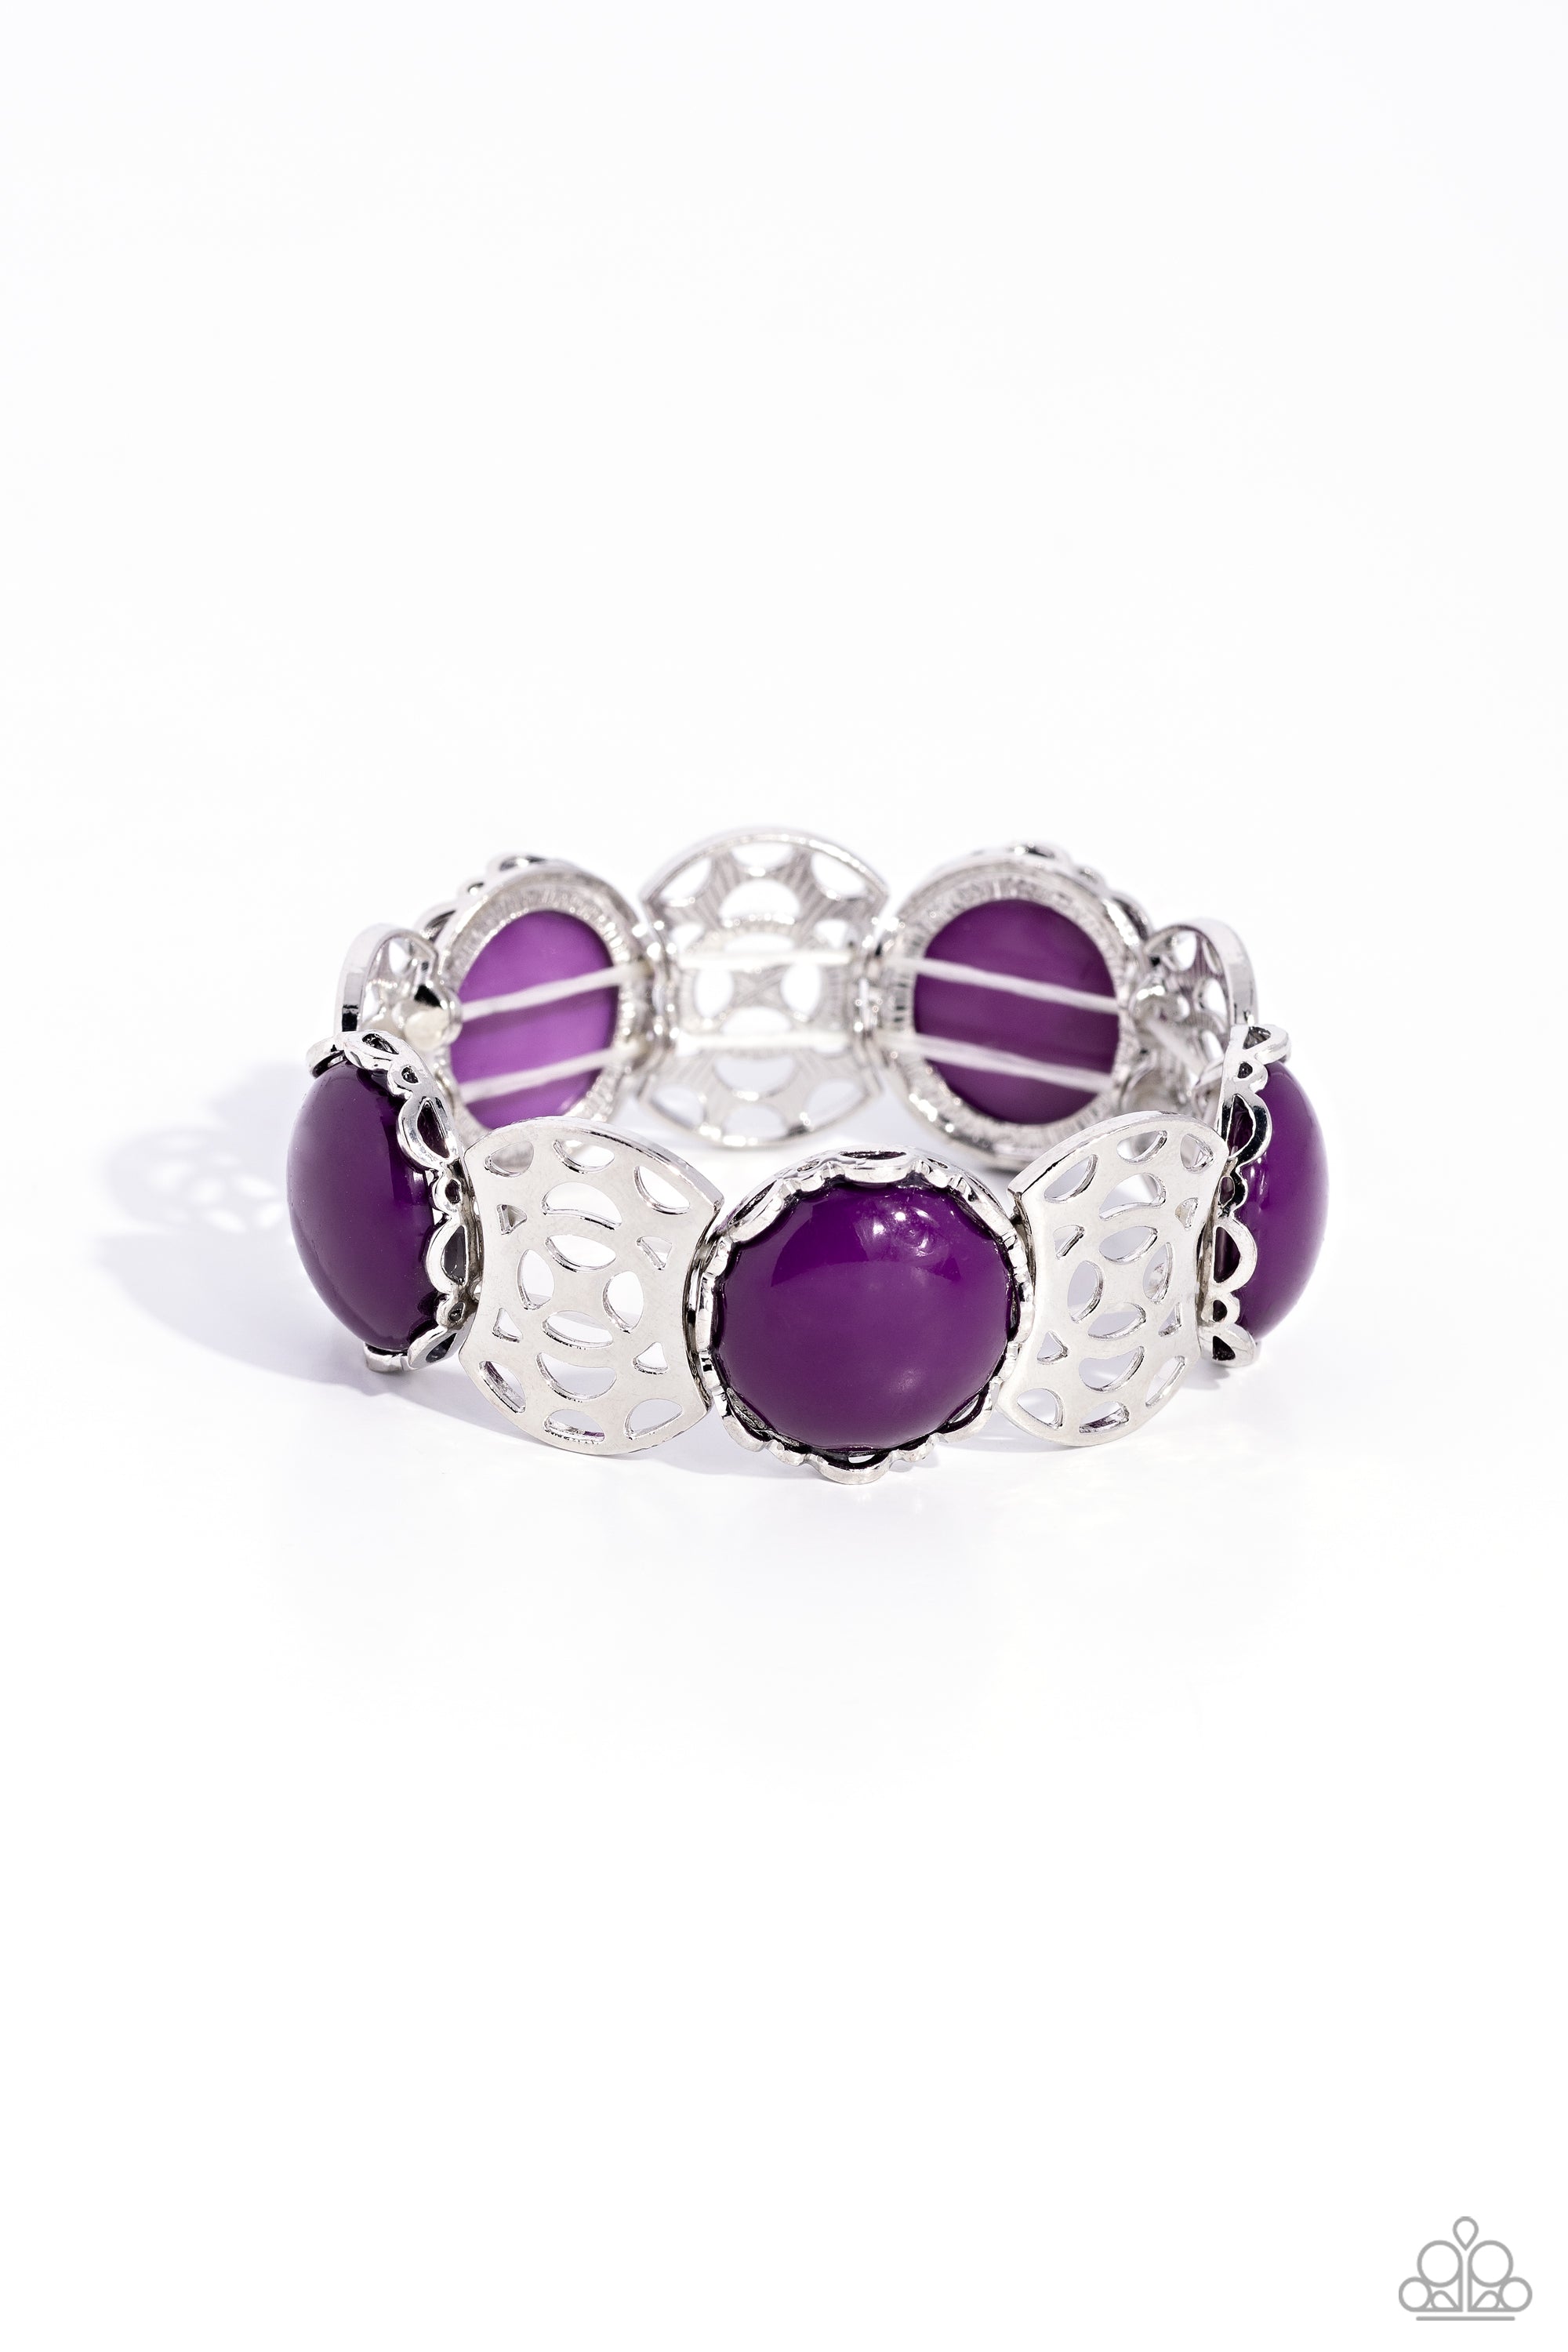 Ethereal Excursion Purple Bracelet - Paparazzi Accessories- lightbox - CarasShop.com - $5 Jewelry by Cara Jewels